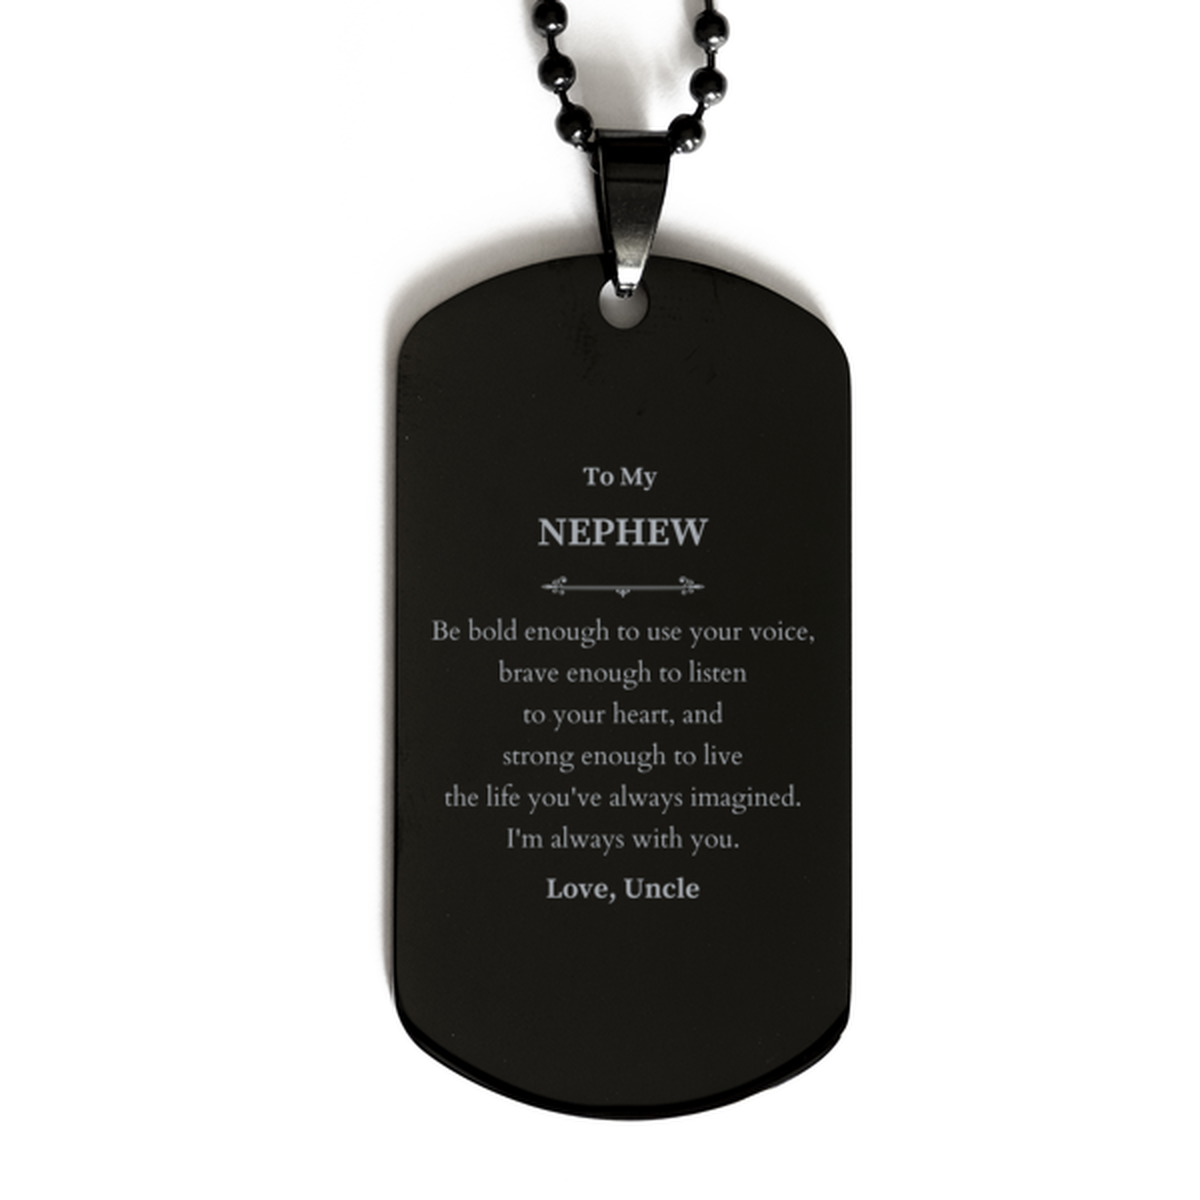 Keepsake Nephew Black Dog Tag Gift Idea Graduation Christmas Birthday Nephew from Uncle, Nephew Be bold enough to use your voice, brave enough to listen to your heart. Love, Uncle